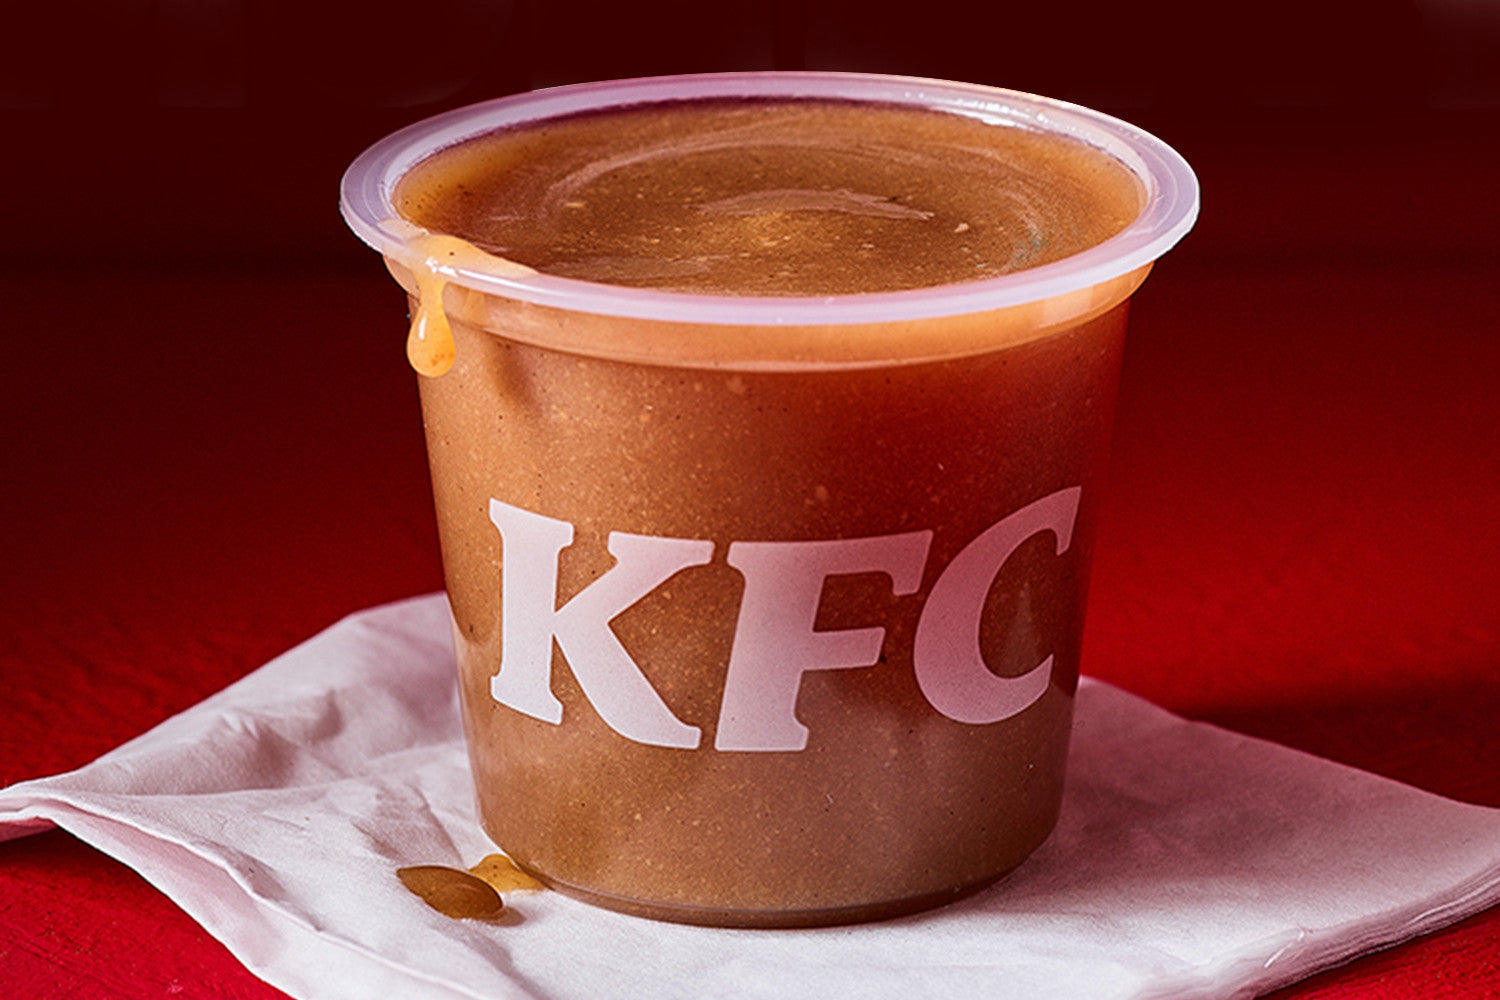 The best fast-food dips and sauces in the UK - ranked